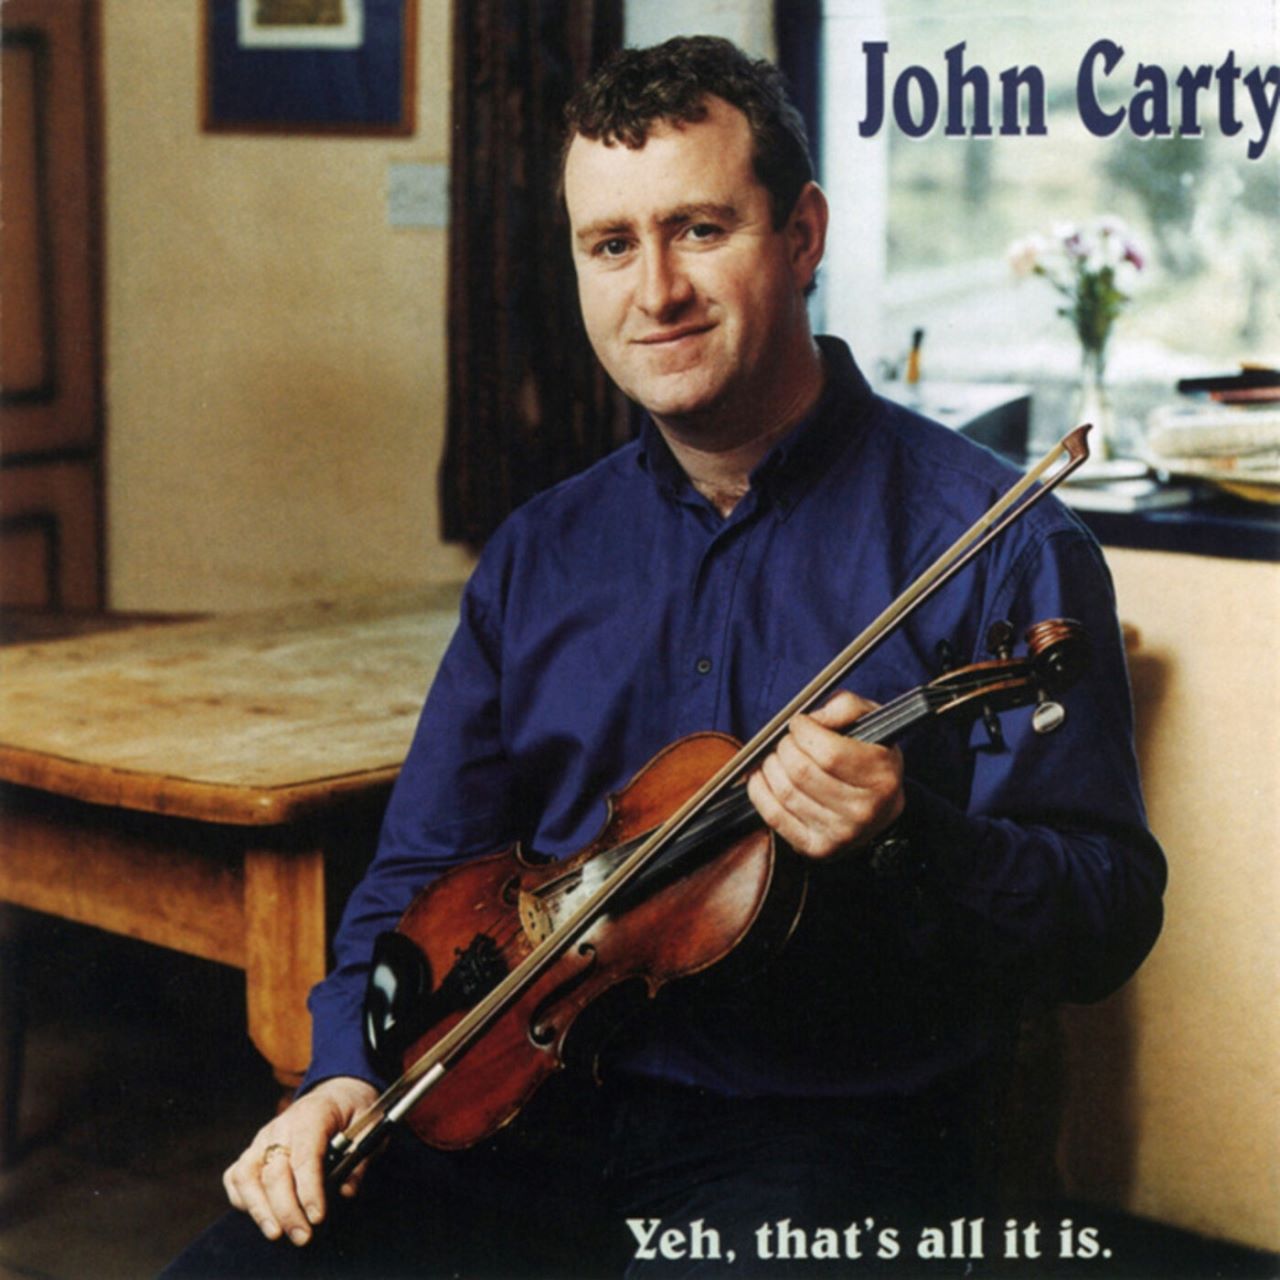 John Carty - Yeh, That's All It Is cover album